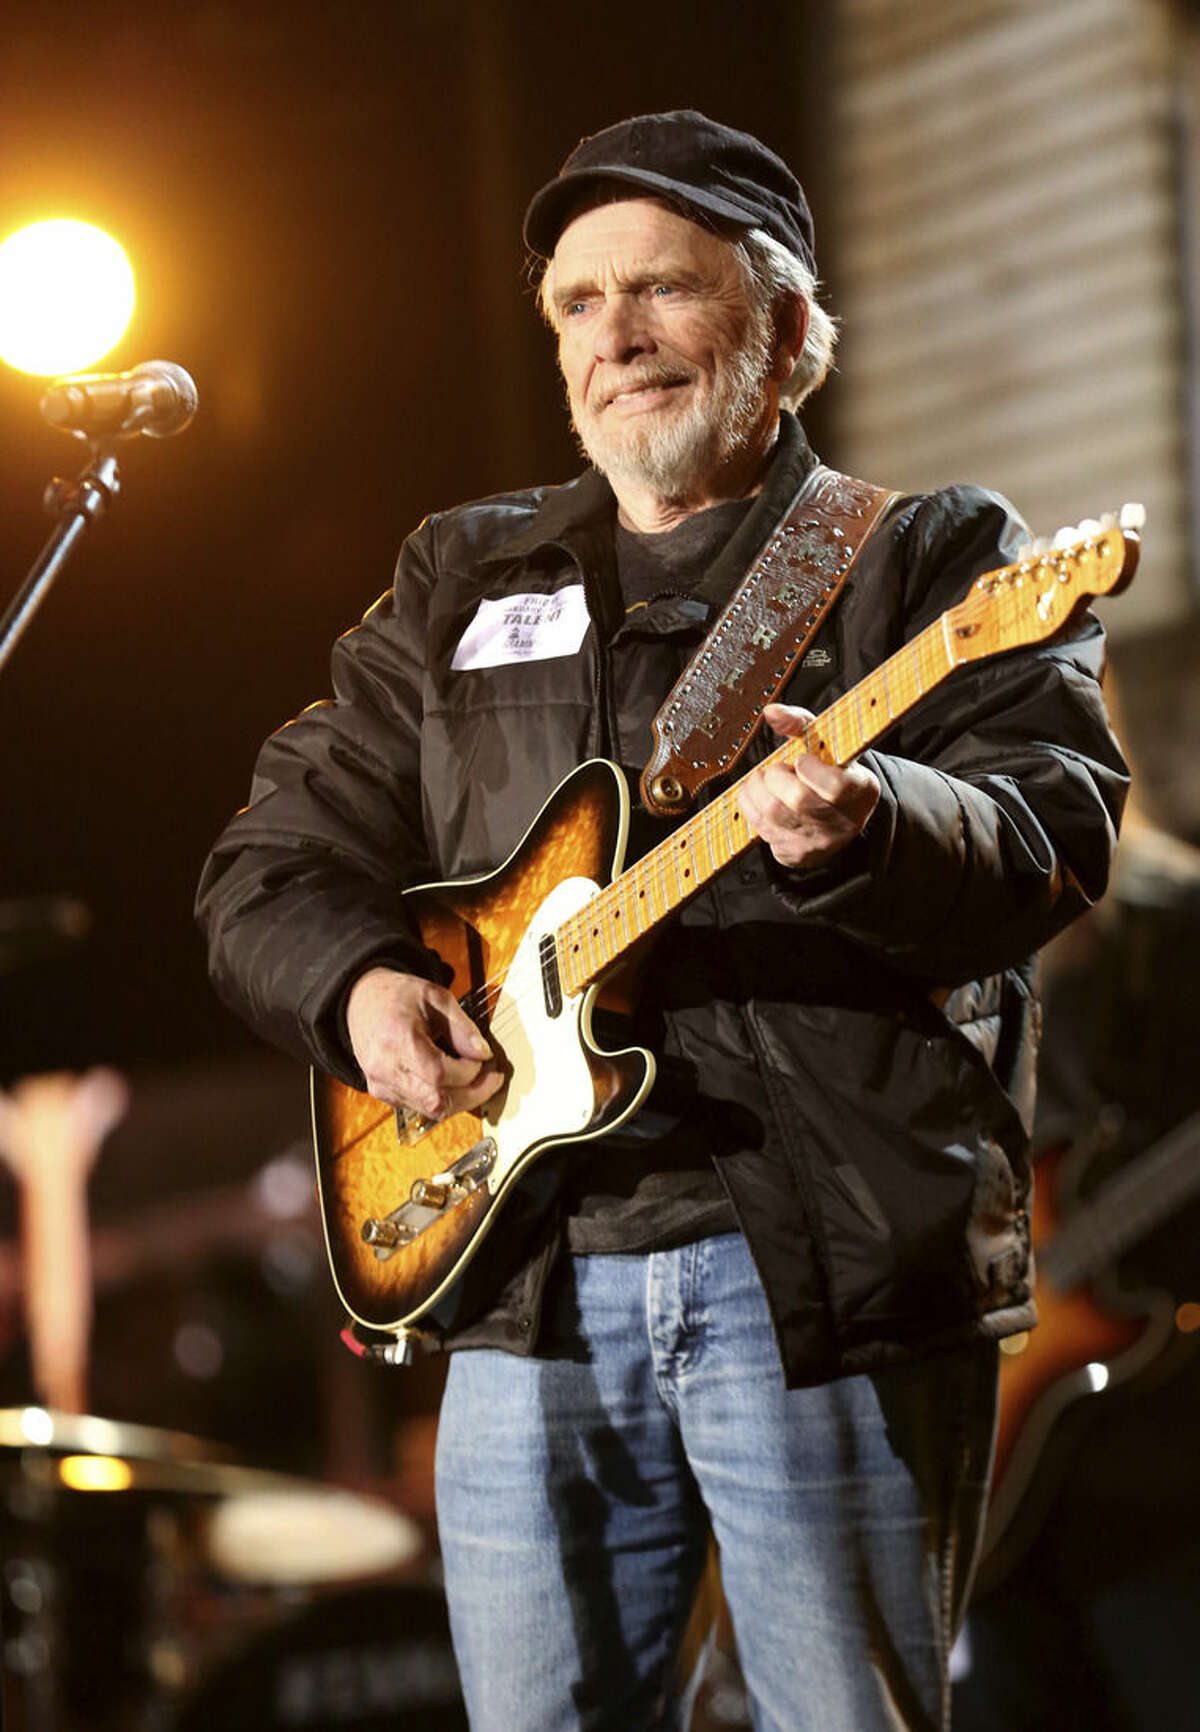 FILE - This Jan. 24, 2014 file photo shows country singer Merle Haggard during a rehearsal for the 56th Annual Grammy Awards in Los Angeles. Haggard died of pneumonia, Wednesday, April 6, 2016, in Palo Cedro, Calif. He was 79. (Photo by Matt Sayles/Invision/AP, File)